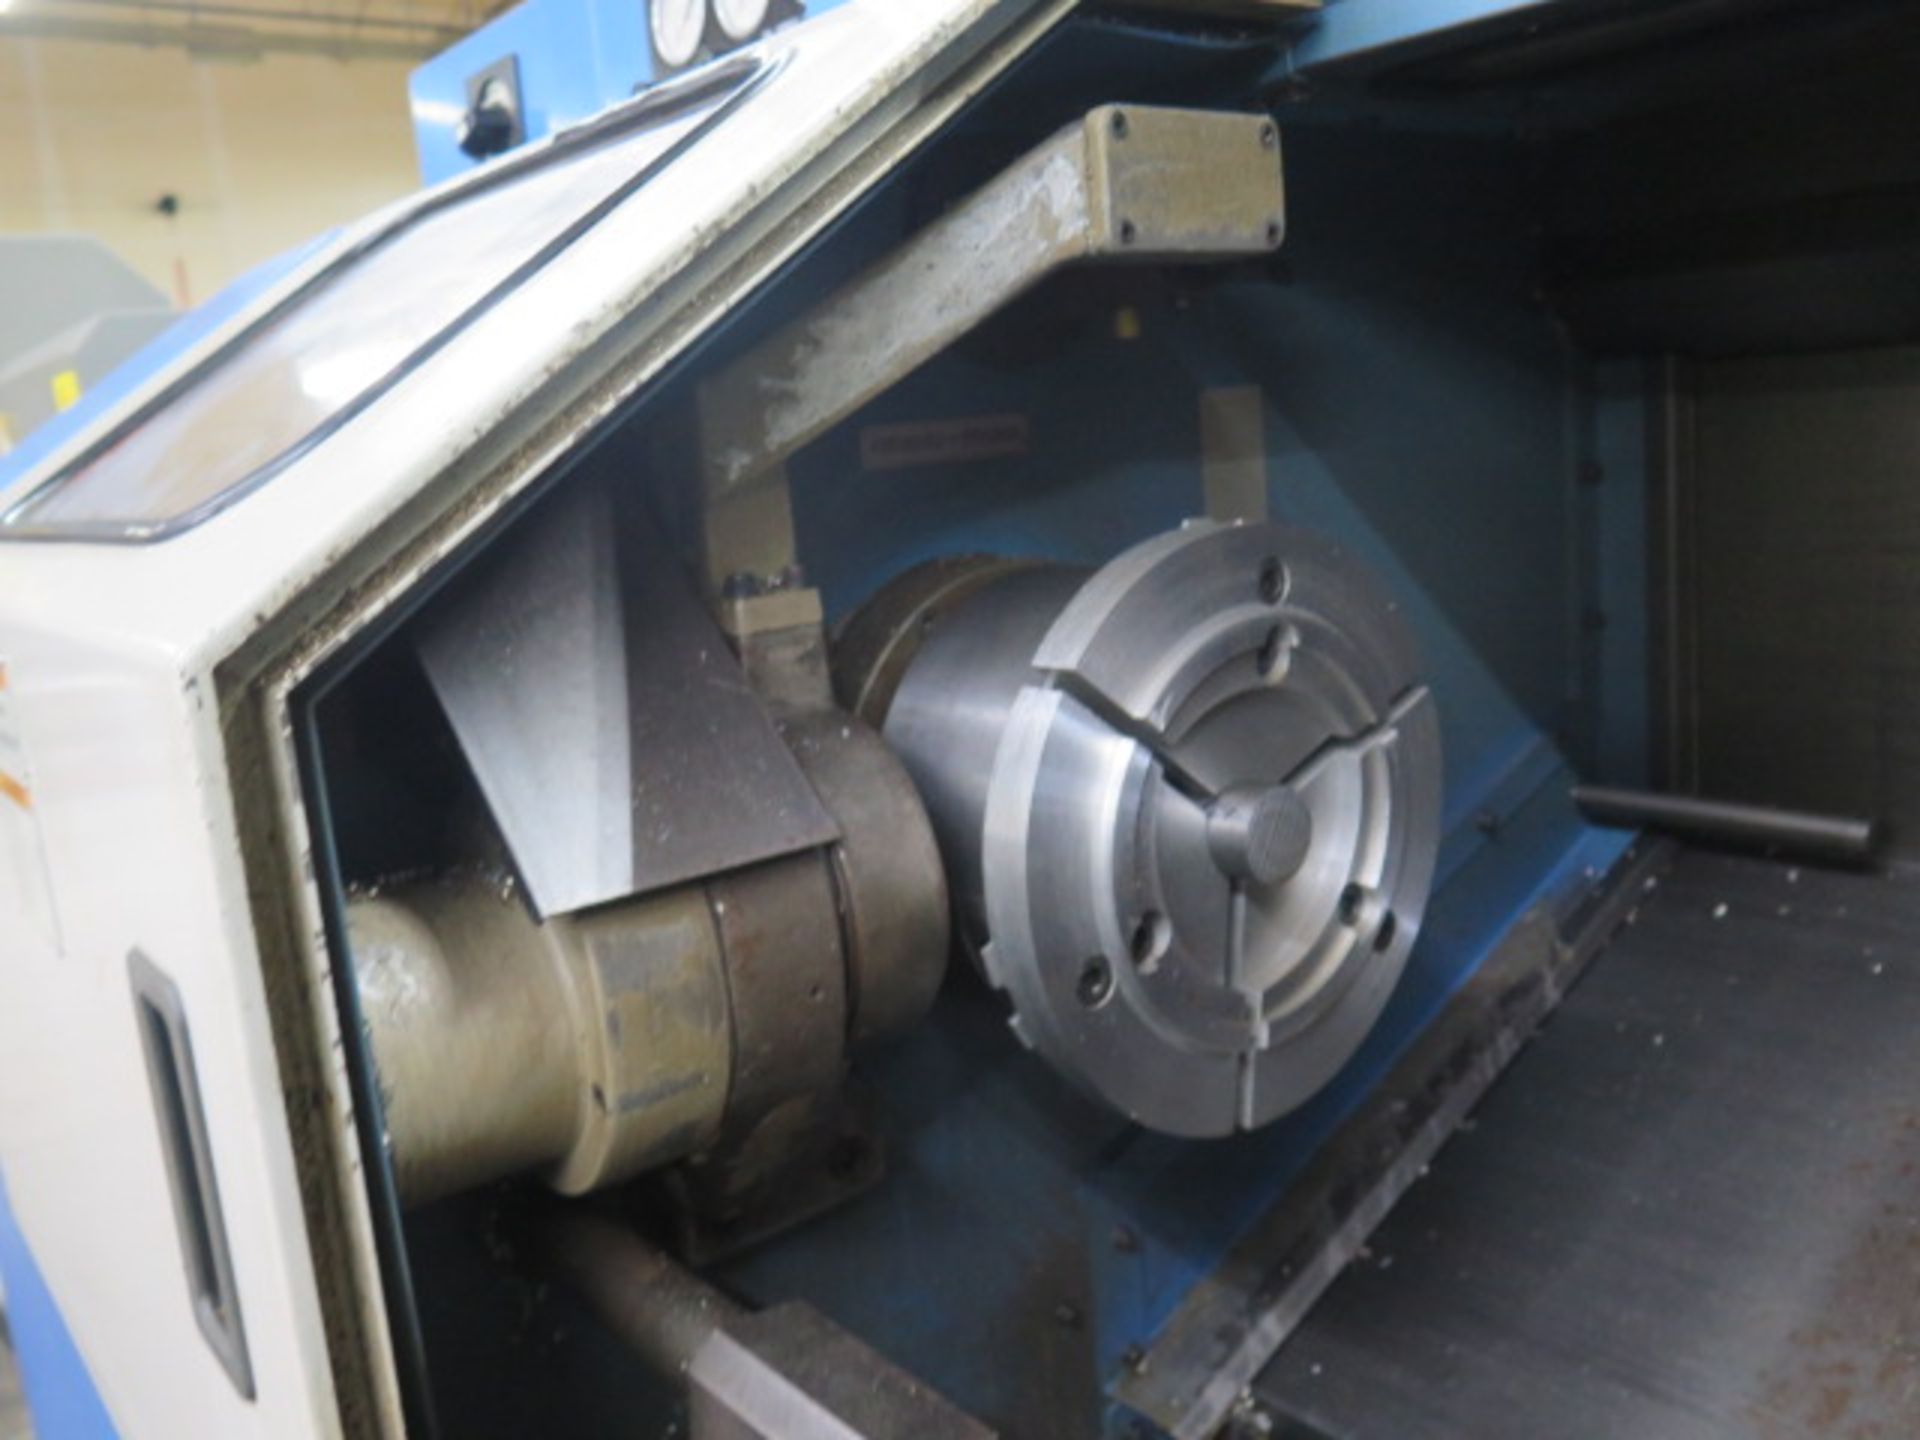 Hyundai HiT 15S CNC Turning Center s/n 5-009 w/ Siemens Controls, Tool Presetter, SOLD AS IS - Image 6 of 16